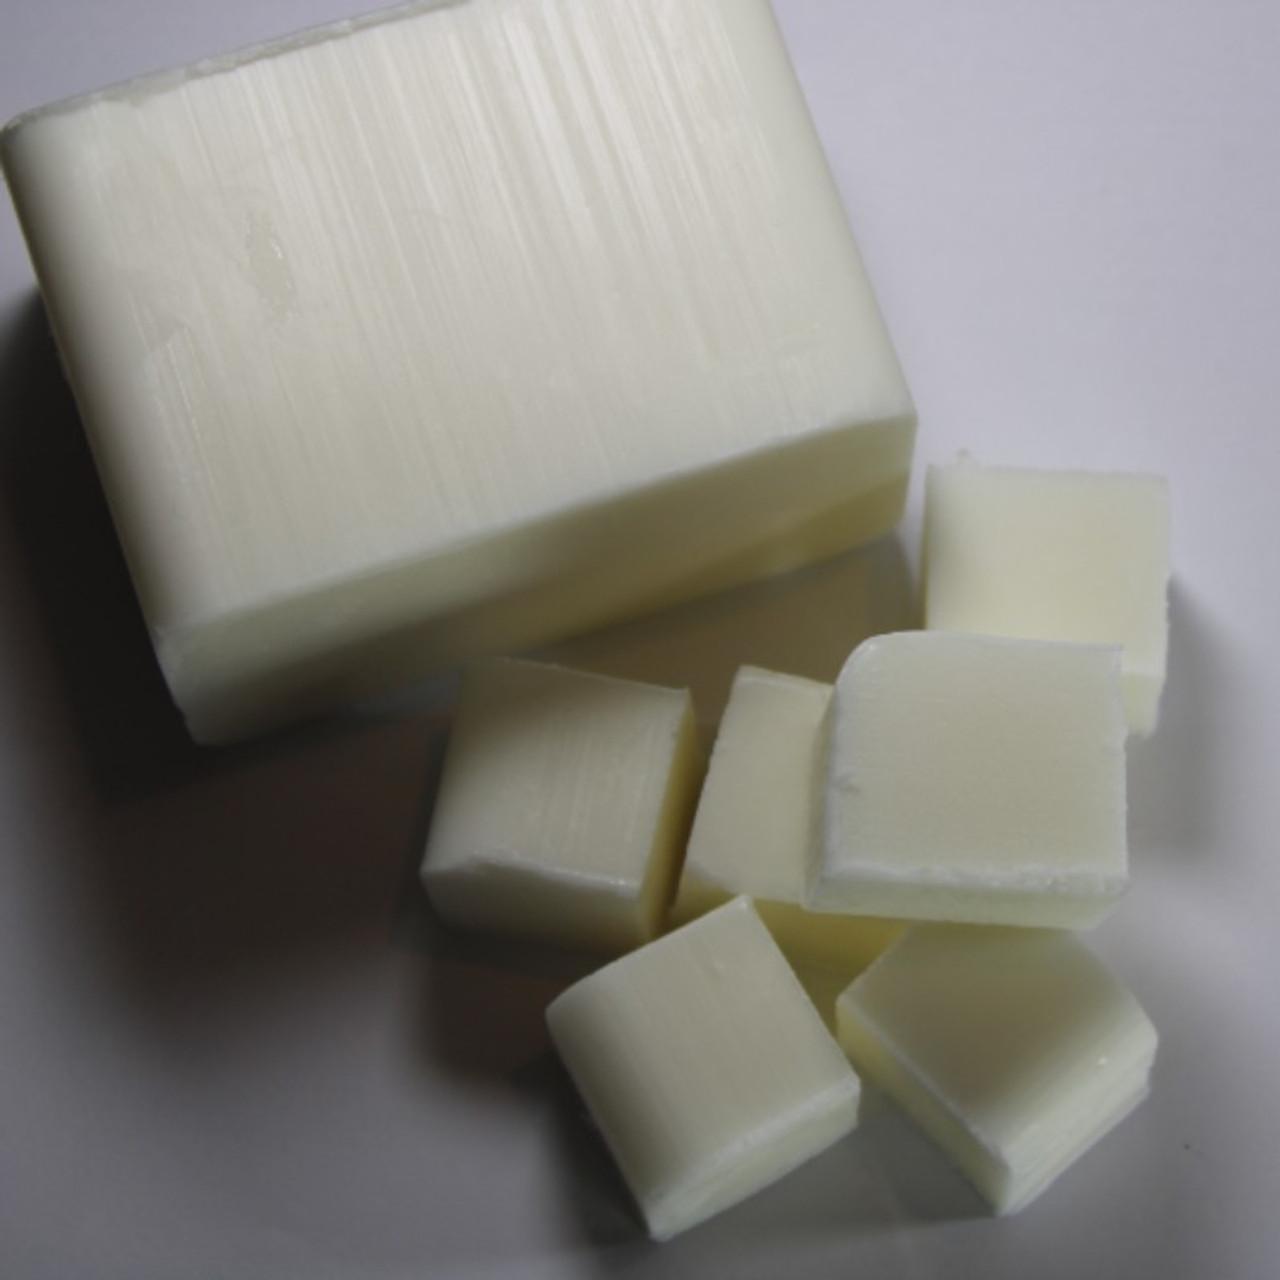 Buy Shea Butter Soap Base Melt and Pour for Soap Making